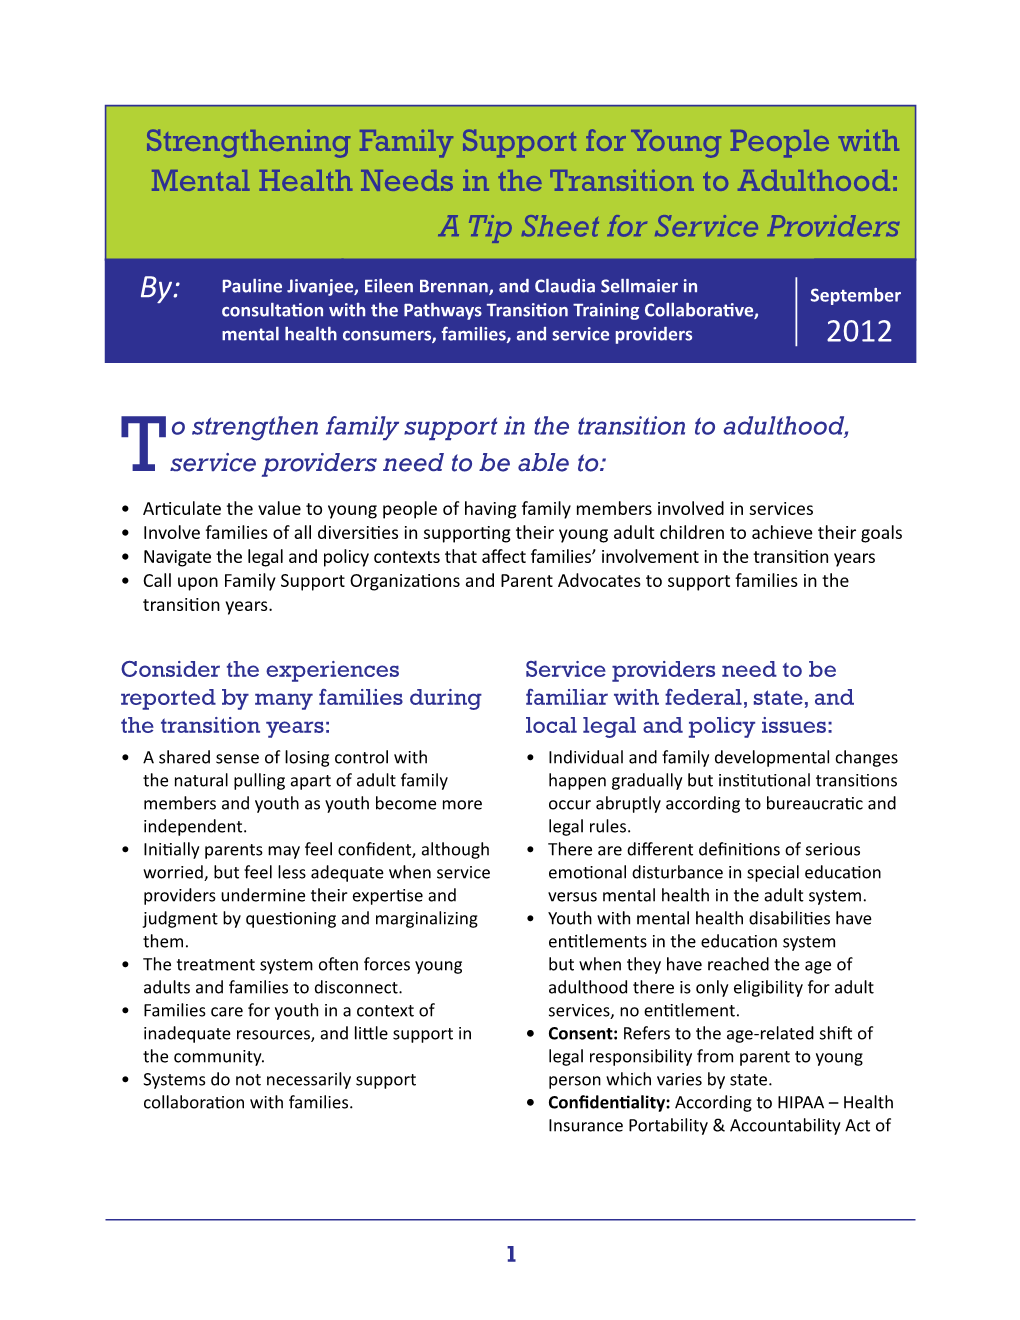 Strengthening Family Support for Young People with Mental Health Needs in the Transition to Adulthood: a Tip Sheet for Service Providers